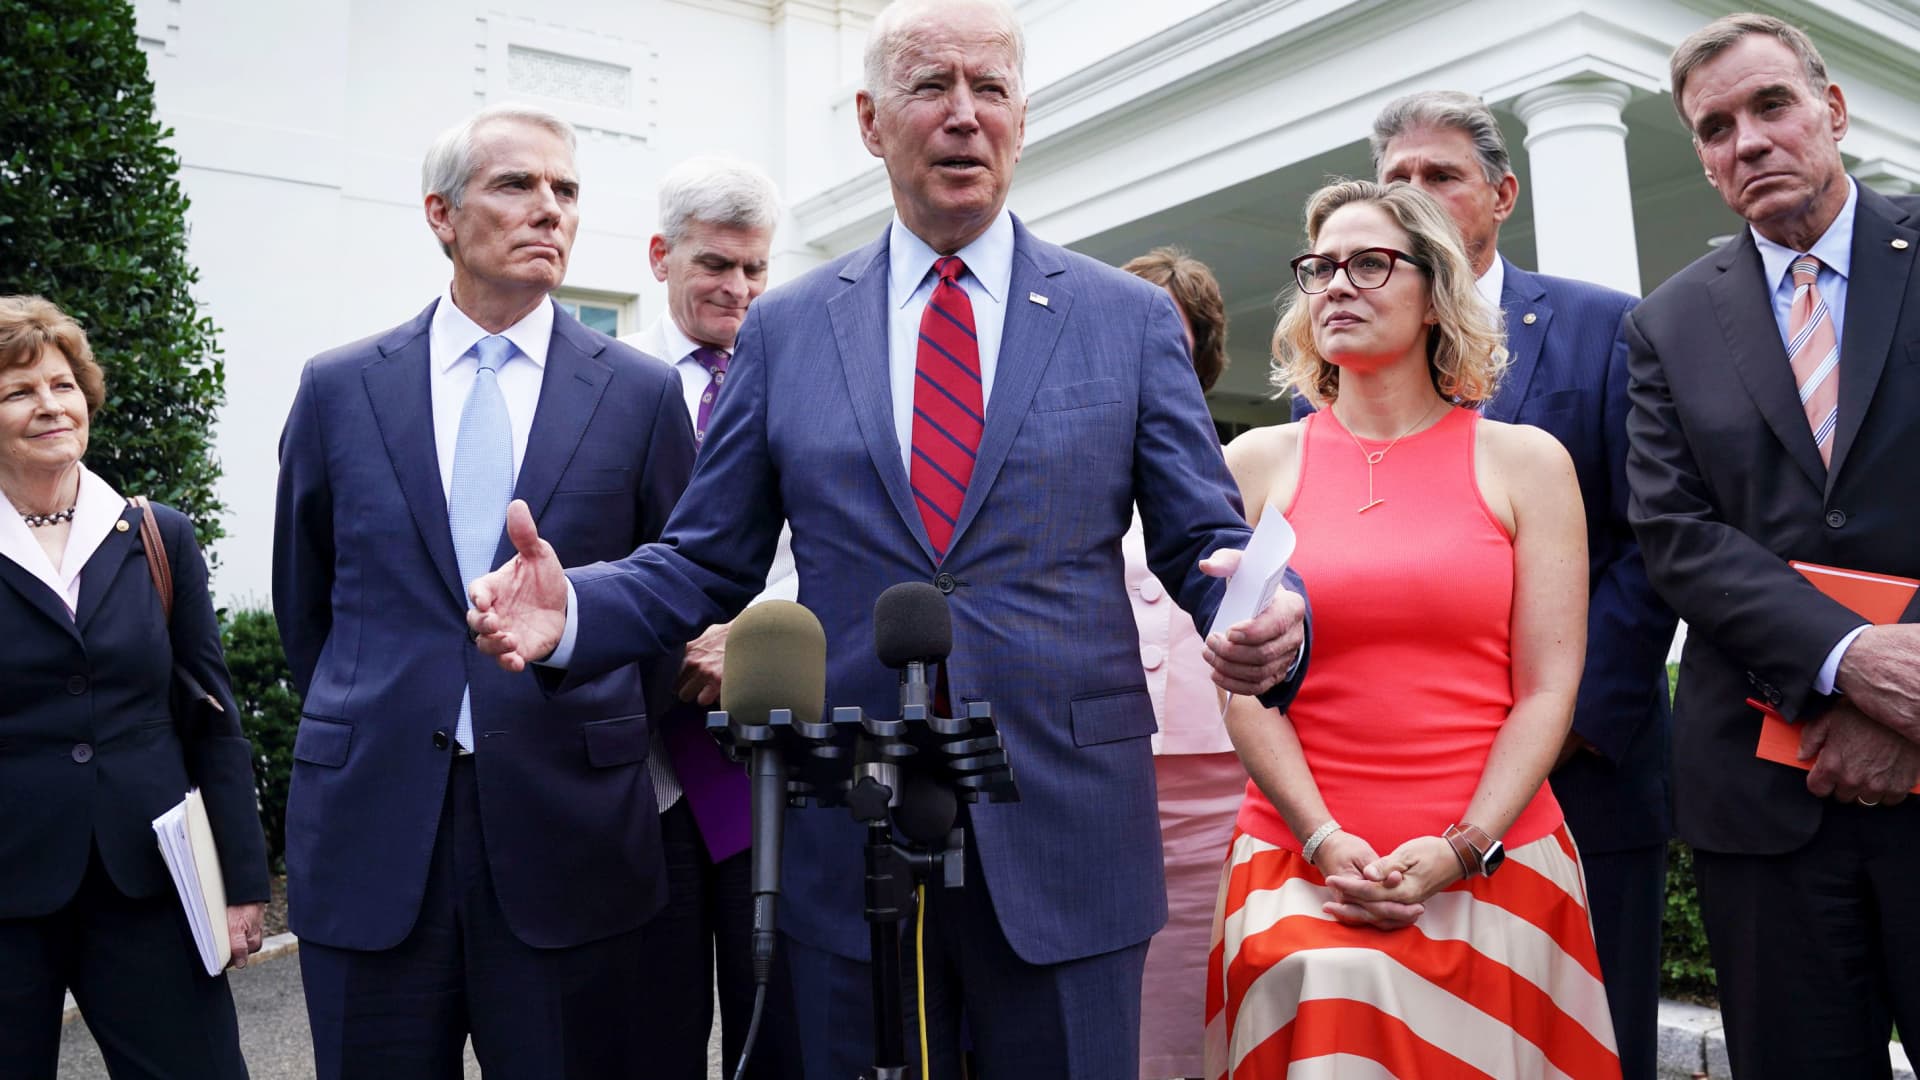 U.S. President Joe Biden speaks following a bipartisan meeting with U.S. senators about the proposed framework for the infrastructure bill, at the White House in Washington, June 24, 2021.